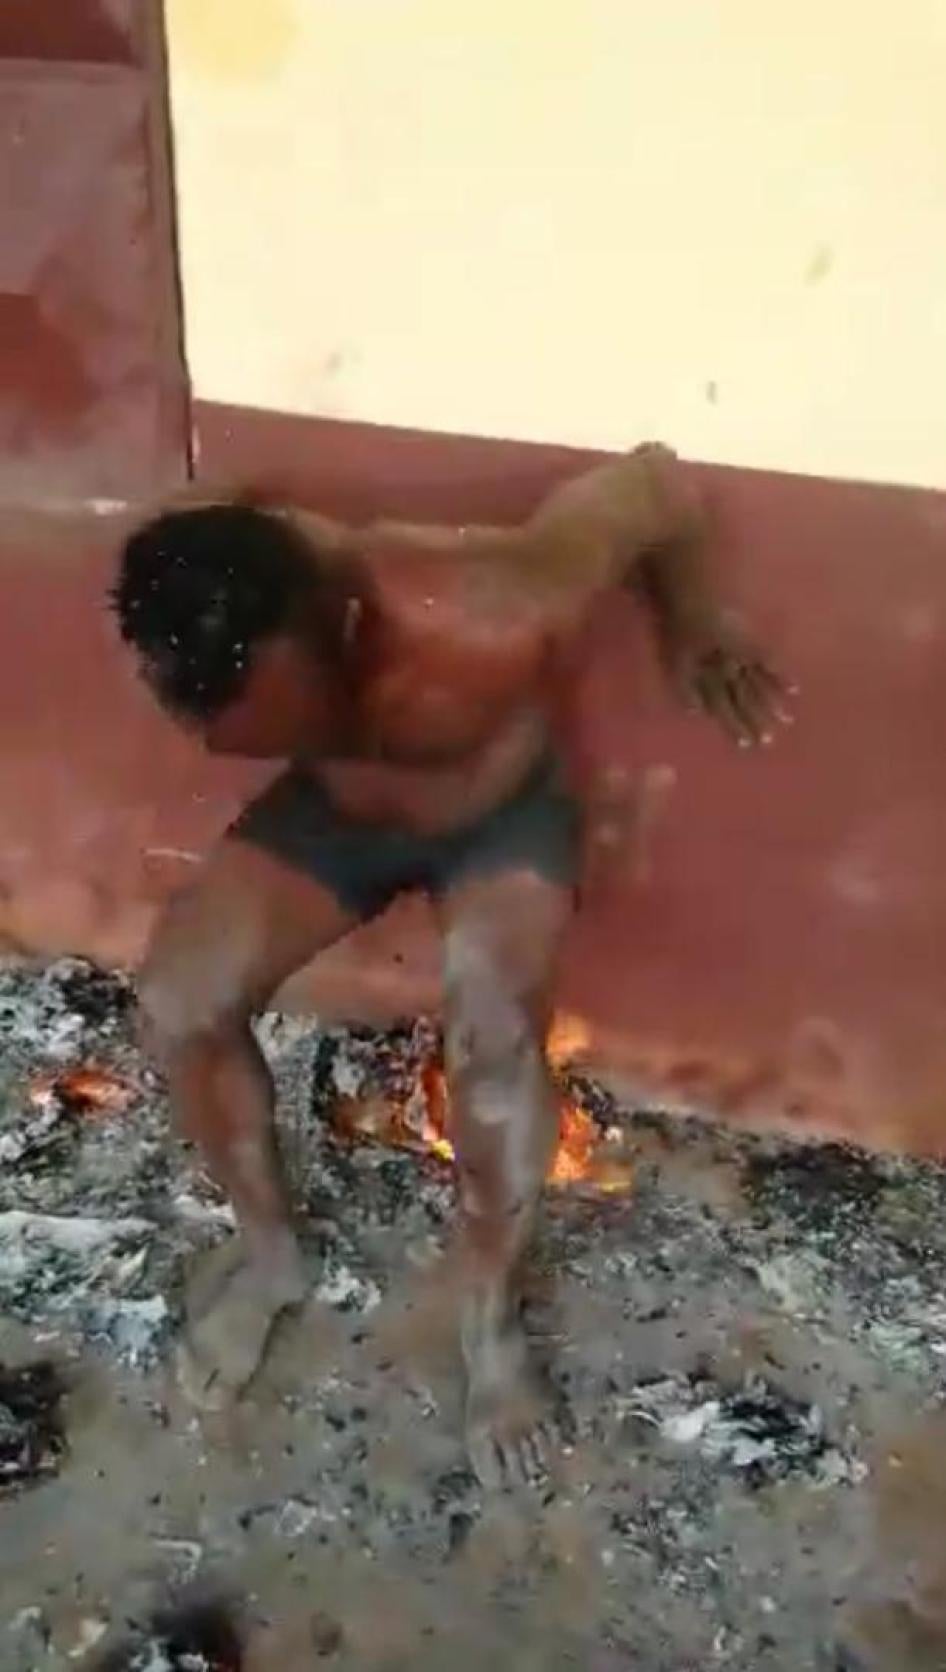 Screenshot of the video showing the victim being forced to sit on burning pieces of paper.